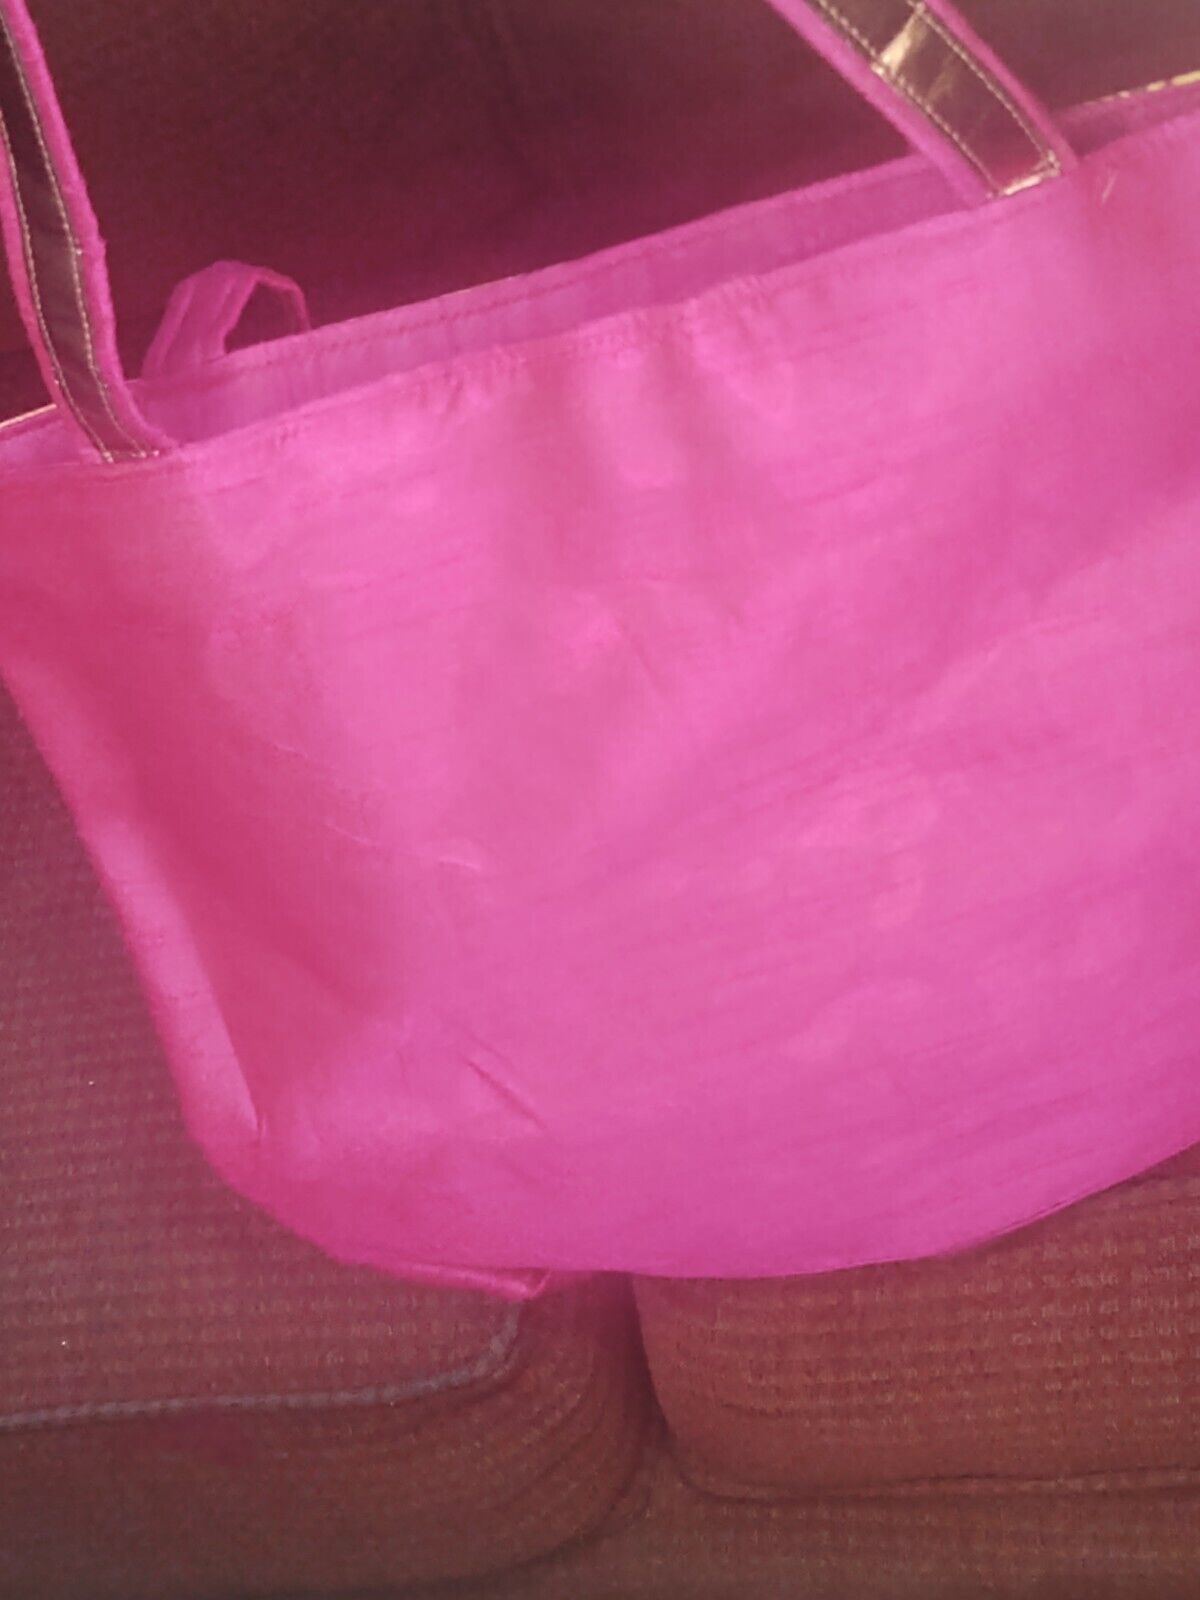 Hot Pink Beautiful Women Tote Bag - preowned - Shell Design Boutique